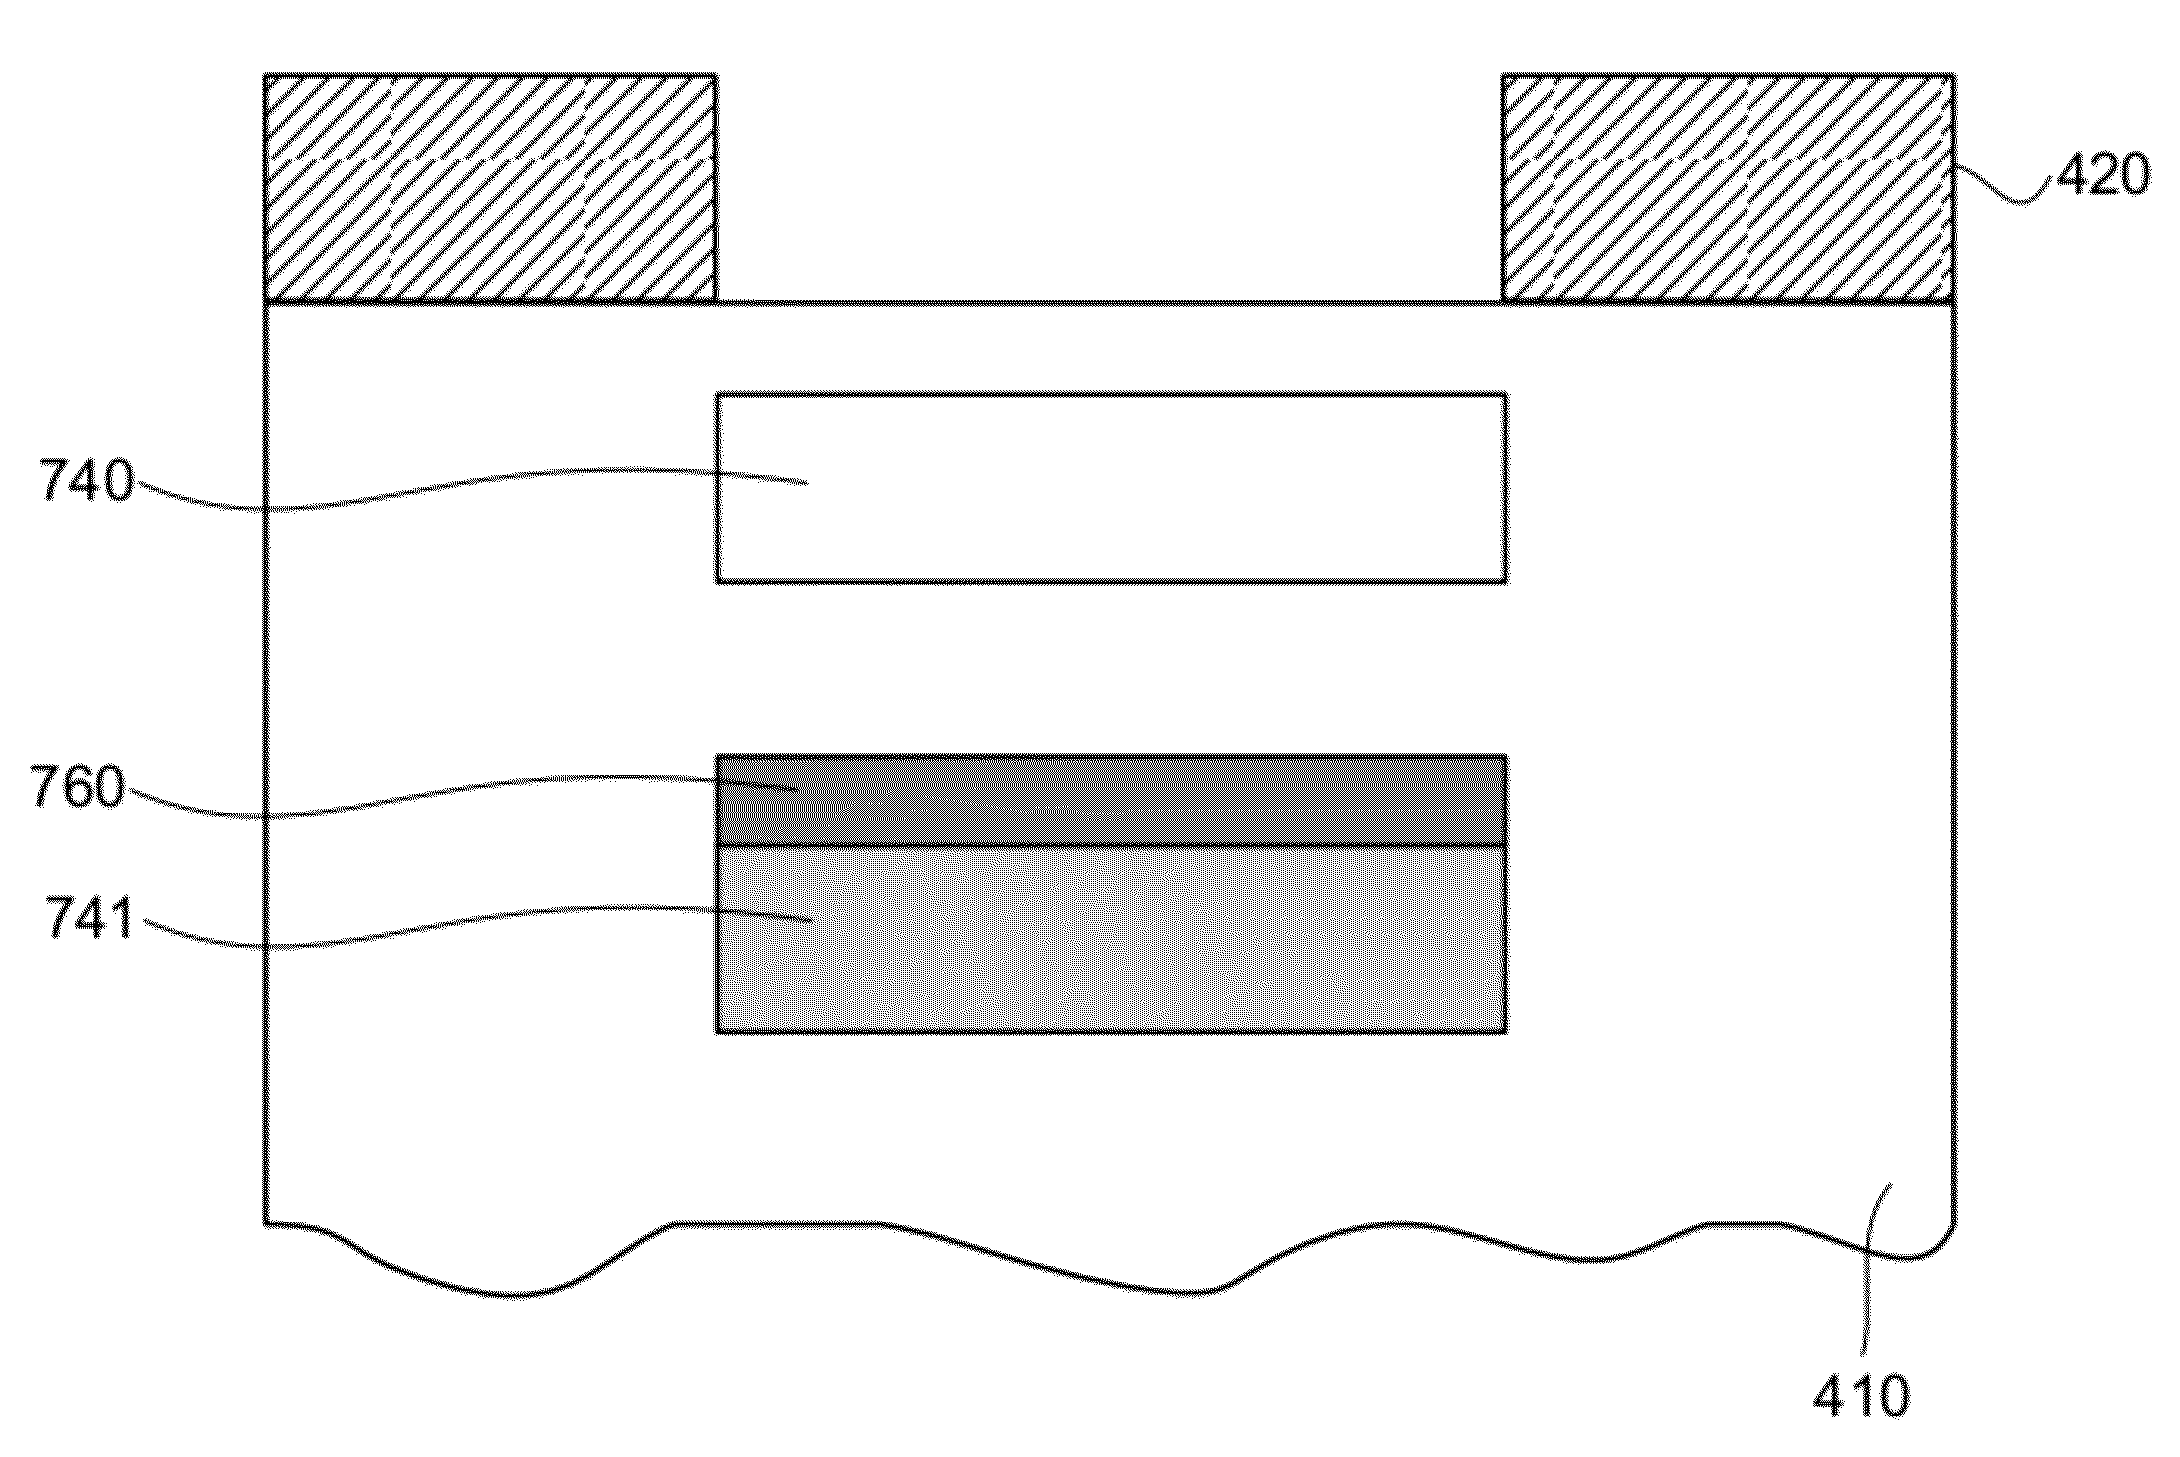 Systems and methods for preparing films comprising metal using sequential ion implantation, and films formed using same